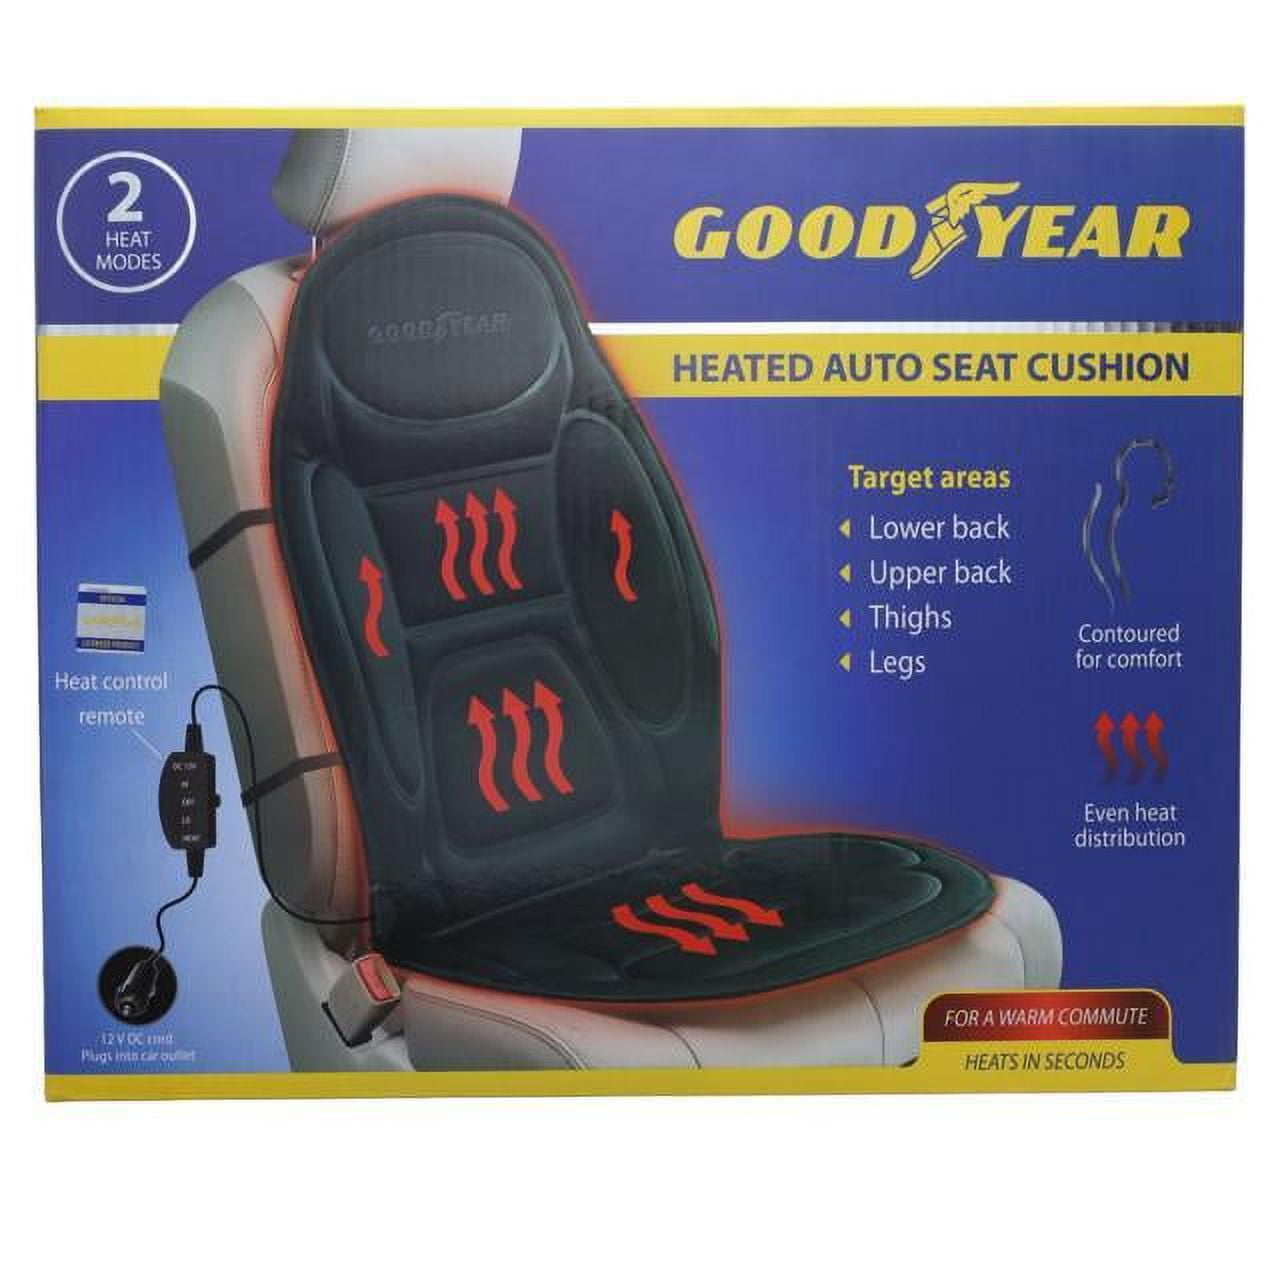 Exposed Cooling Gel Car Seat Cushion Chair Office Cushion - Online Shopping  for Car Heated Blankets,Heated Seat Cushion,Car Gel Cushions,Free Shipping  From USA